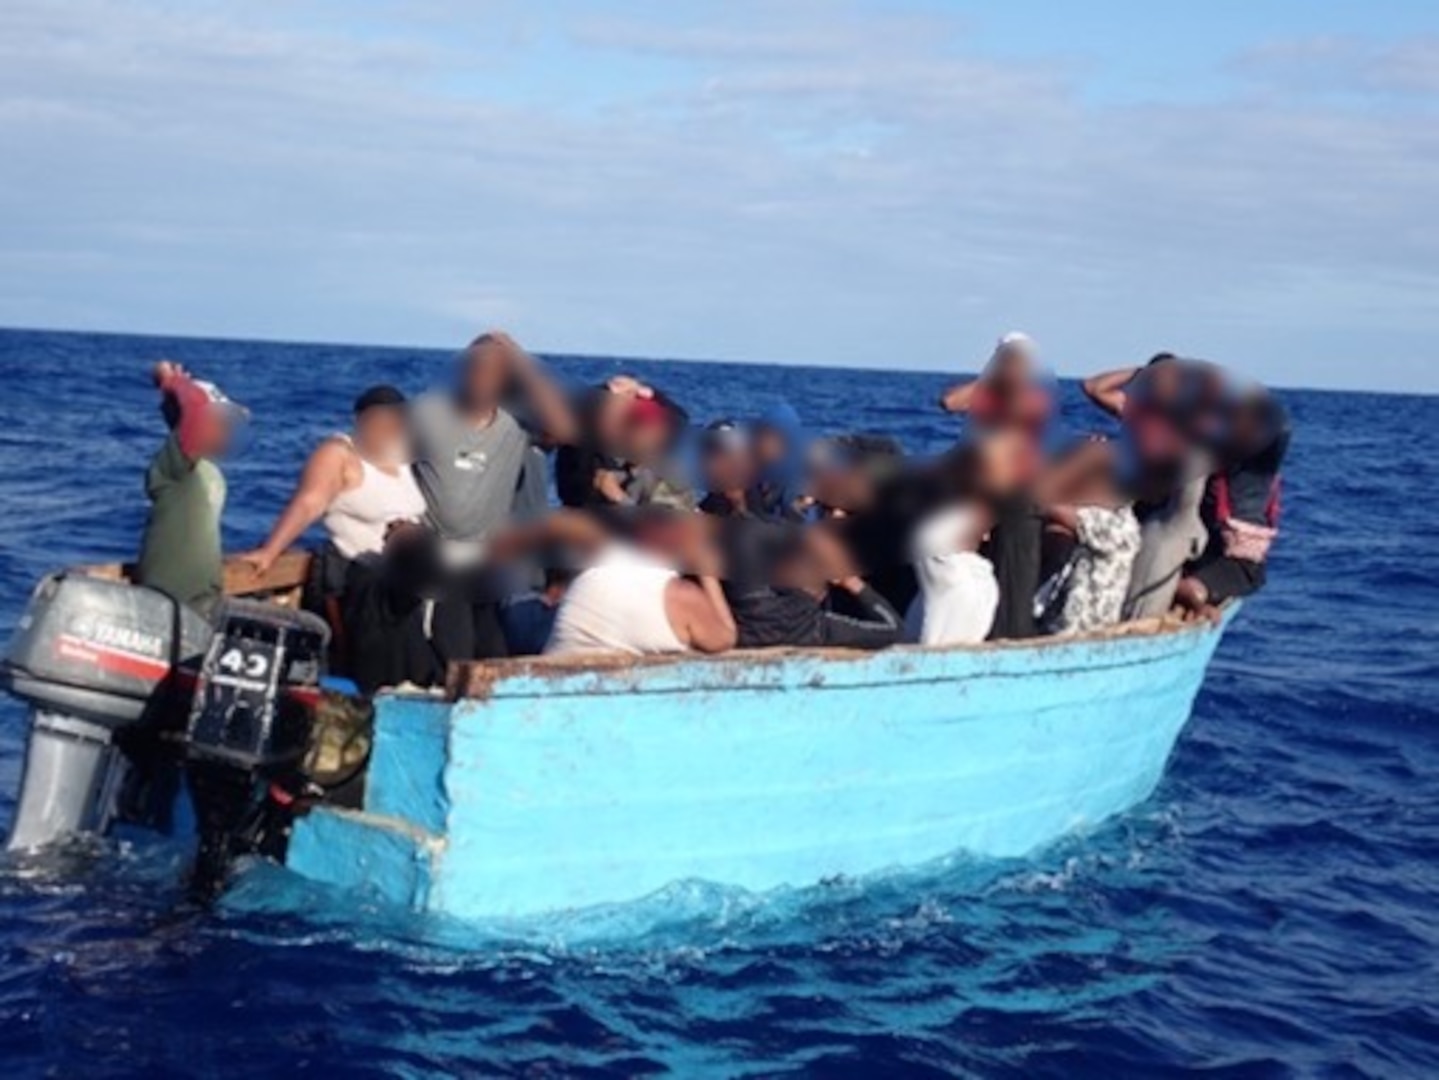 Coast Guard Cutter Winslow Griesser interdicts an unlawful migration voyage in Mona Passage waters April 22, 2024.  The Coast Guard Cutter Heriberto Hernandez returned 27 migrants interdicted in this group, along with a group of 13 migrants from a separate interdiction, to Dominican Republic, April 24, 2024. (U.S. Coast Guard photo)